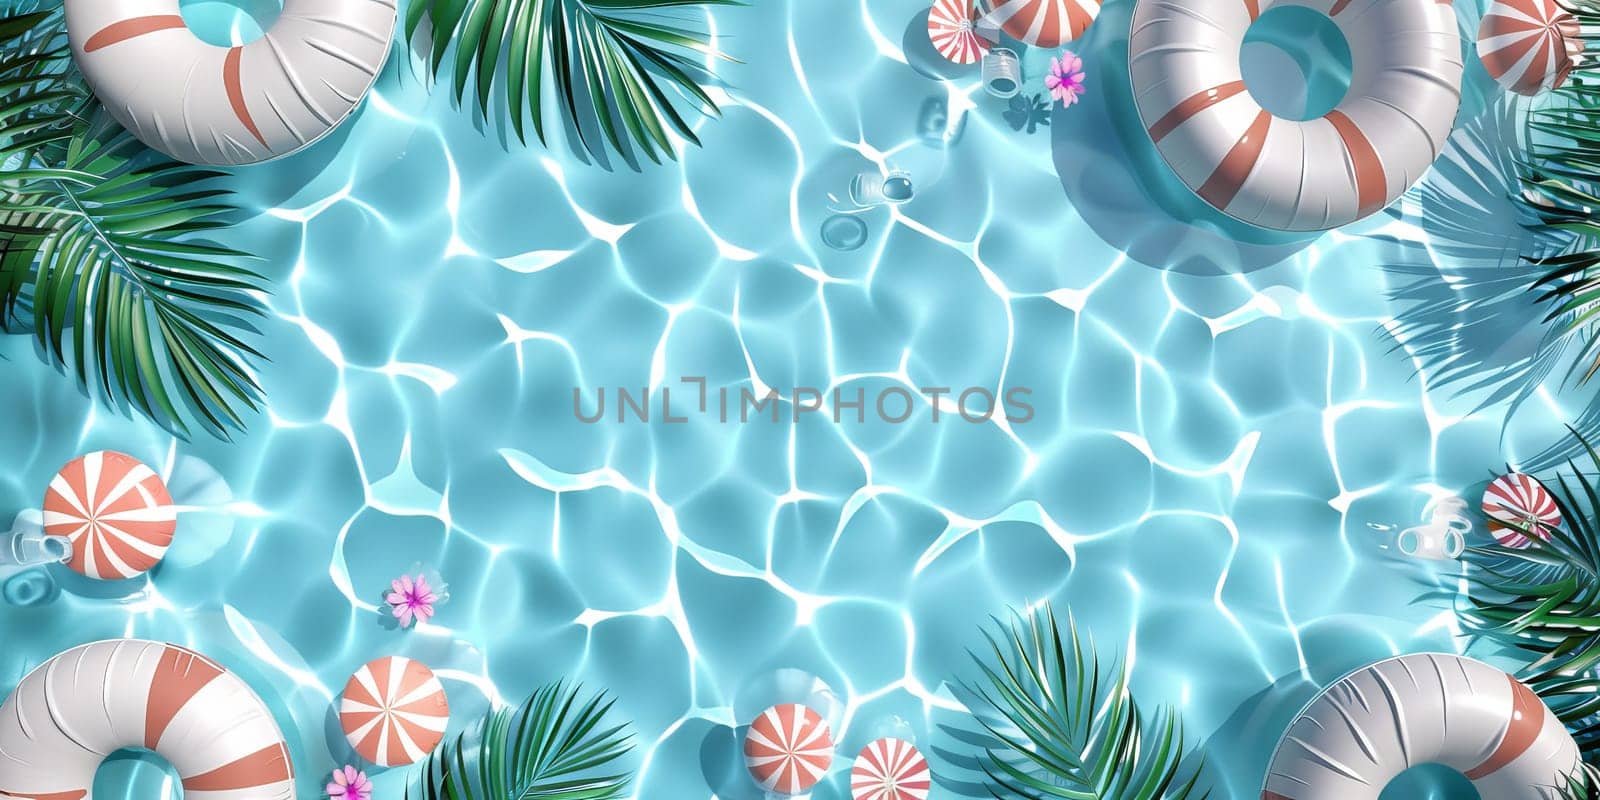 A blue pool with a white and pink umbrella and a pink and white flower by nateemee